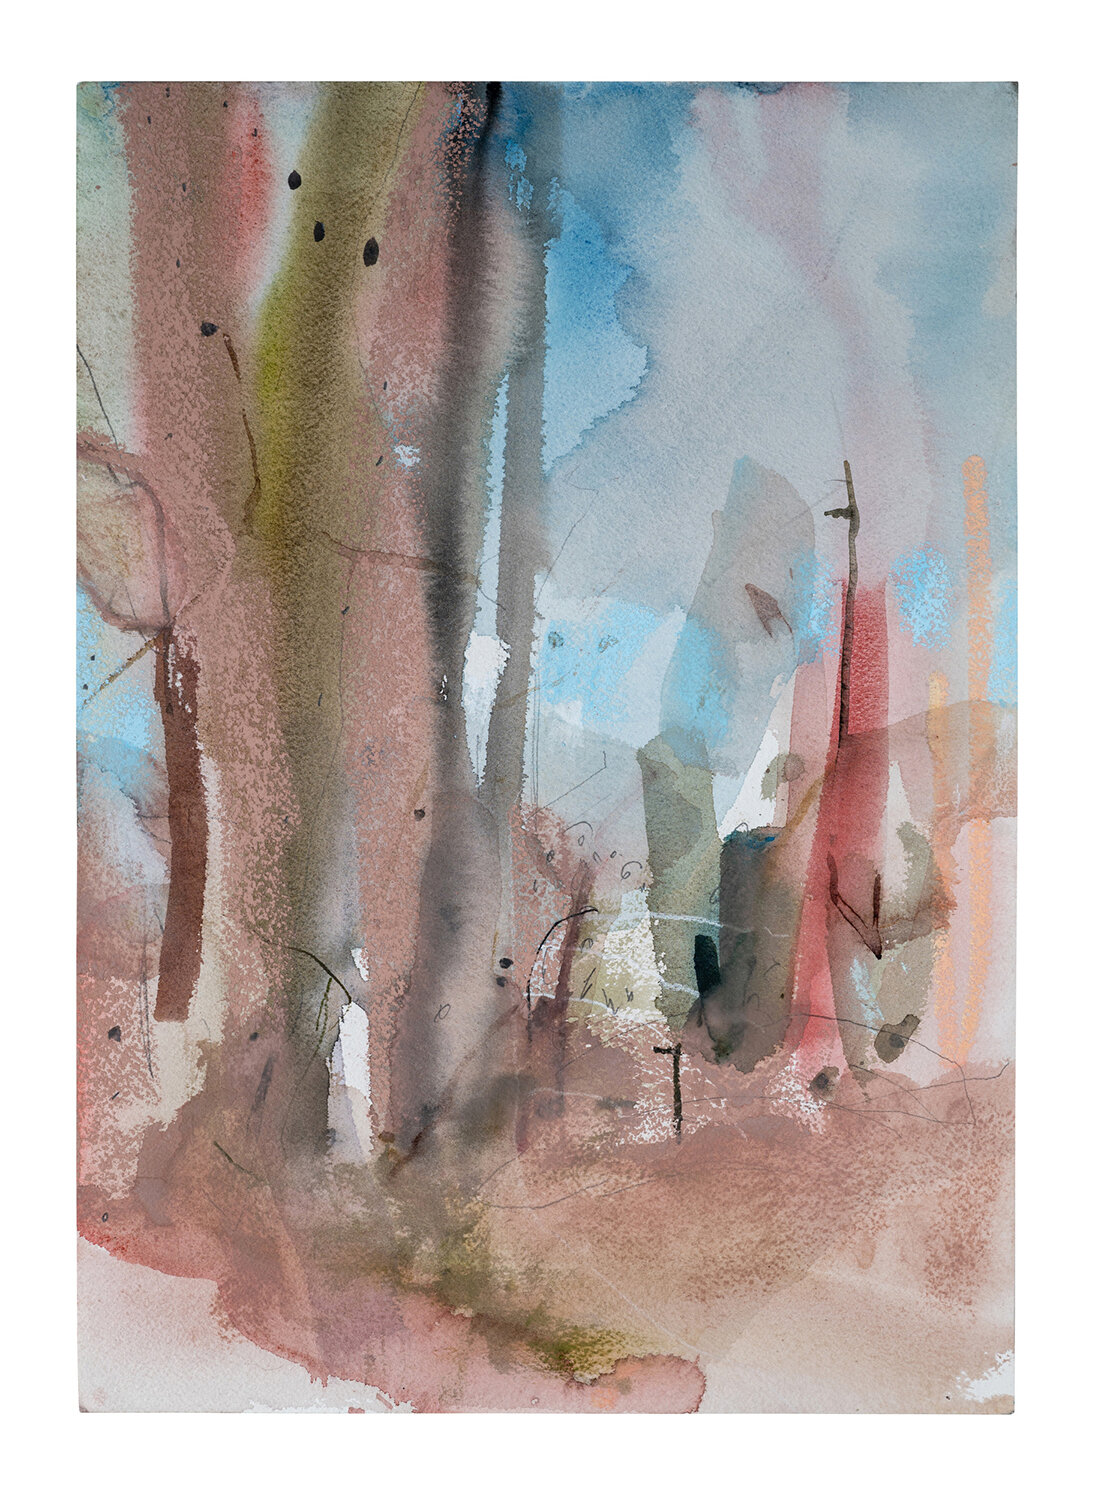   Boranup Forest No 7 , 2021, 69 x 53 cm,  watercolour with pastel and pencil on paper  Collected 